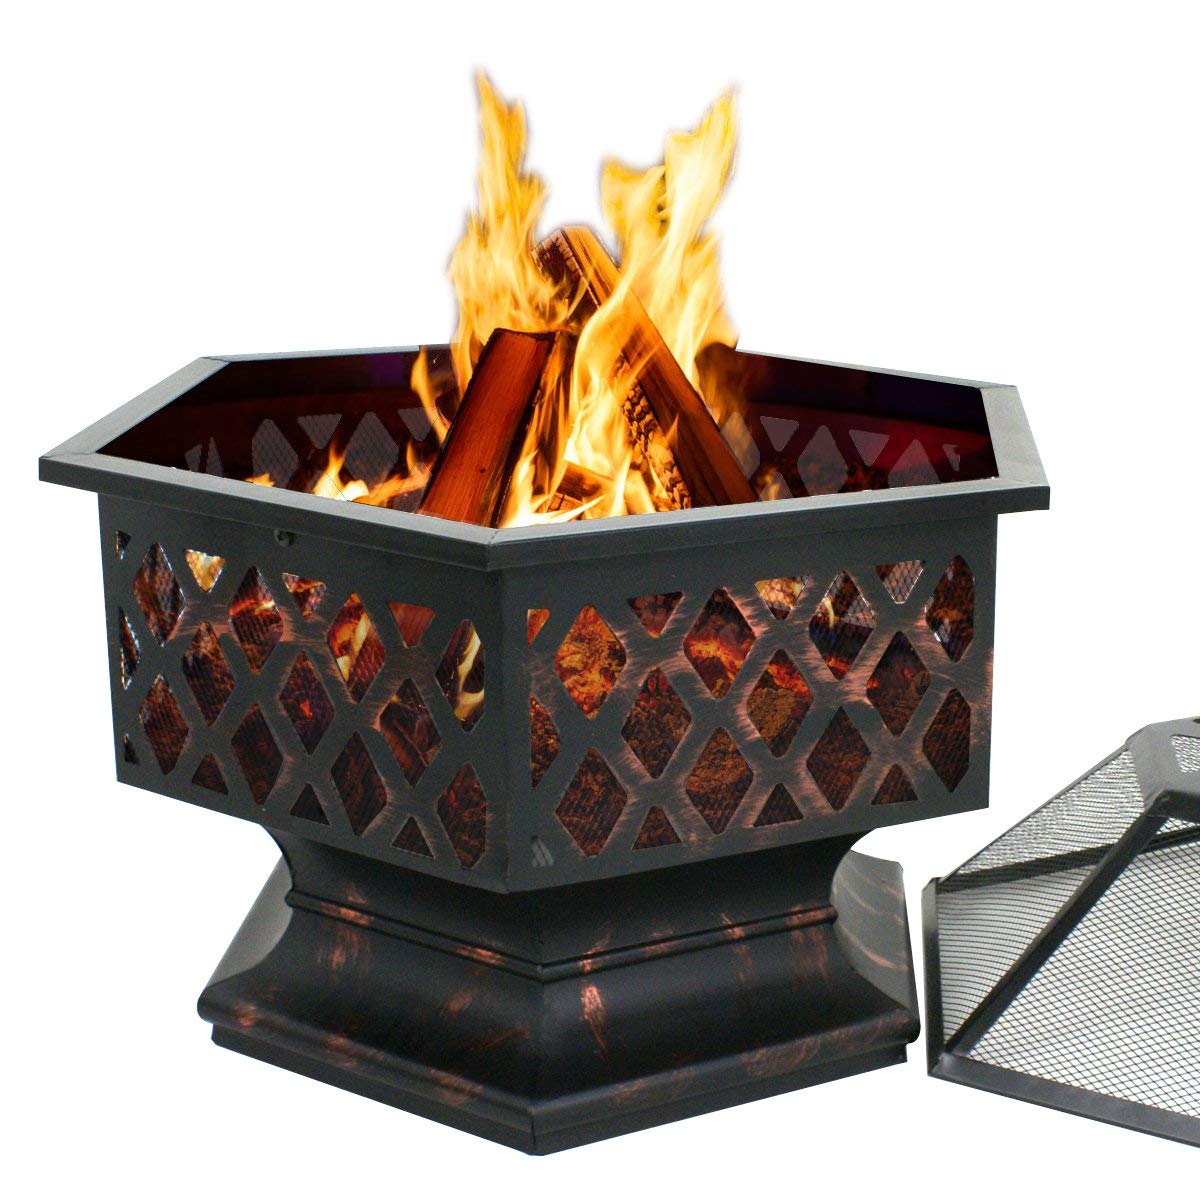 Spark Guard Fireplace Screen Luxury Homgarden 24" Hex Shaped Fire Pit Bowl Outdoor Heater Home Garden Backyard Patio Deck Stove Fireplace Table Wood Burning Oil Rubbed Bronze